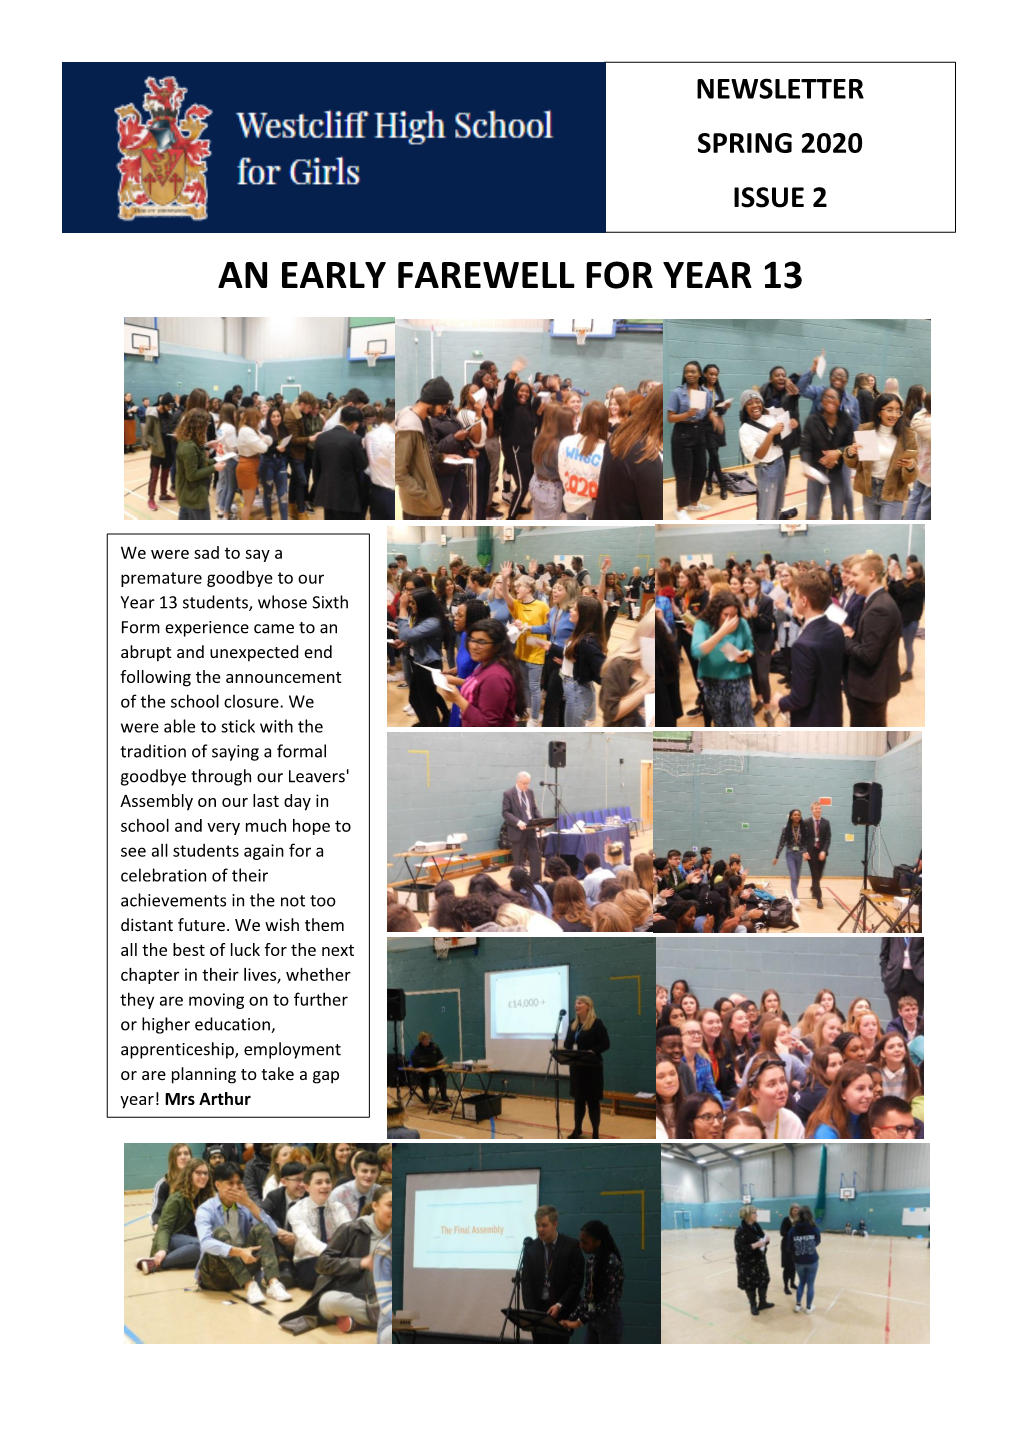 An Early Farewell for Year 13